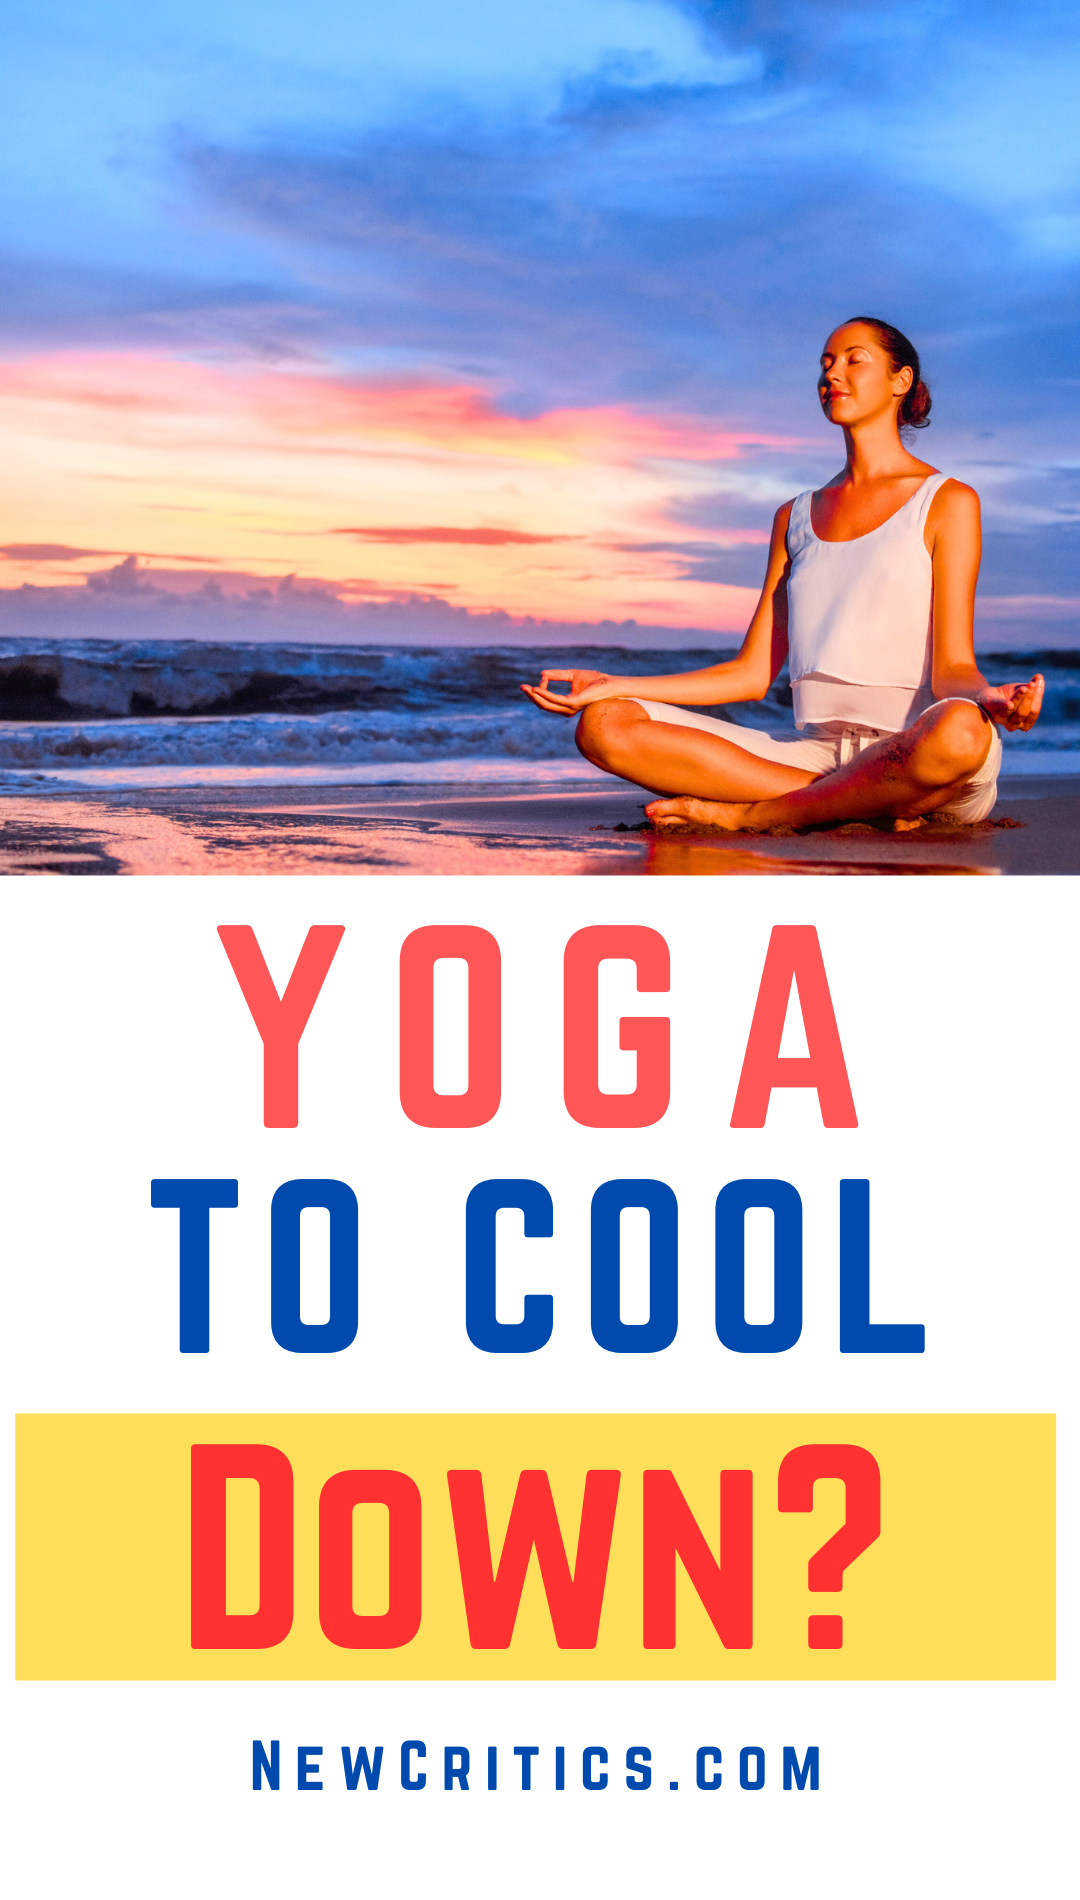 Yoga To Cool Down / Canva